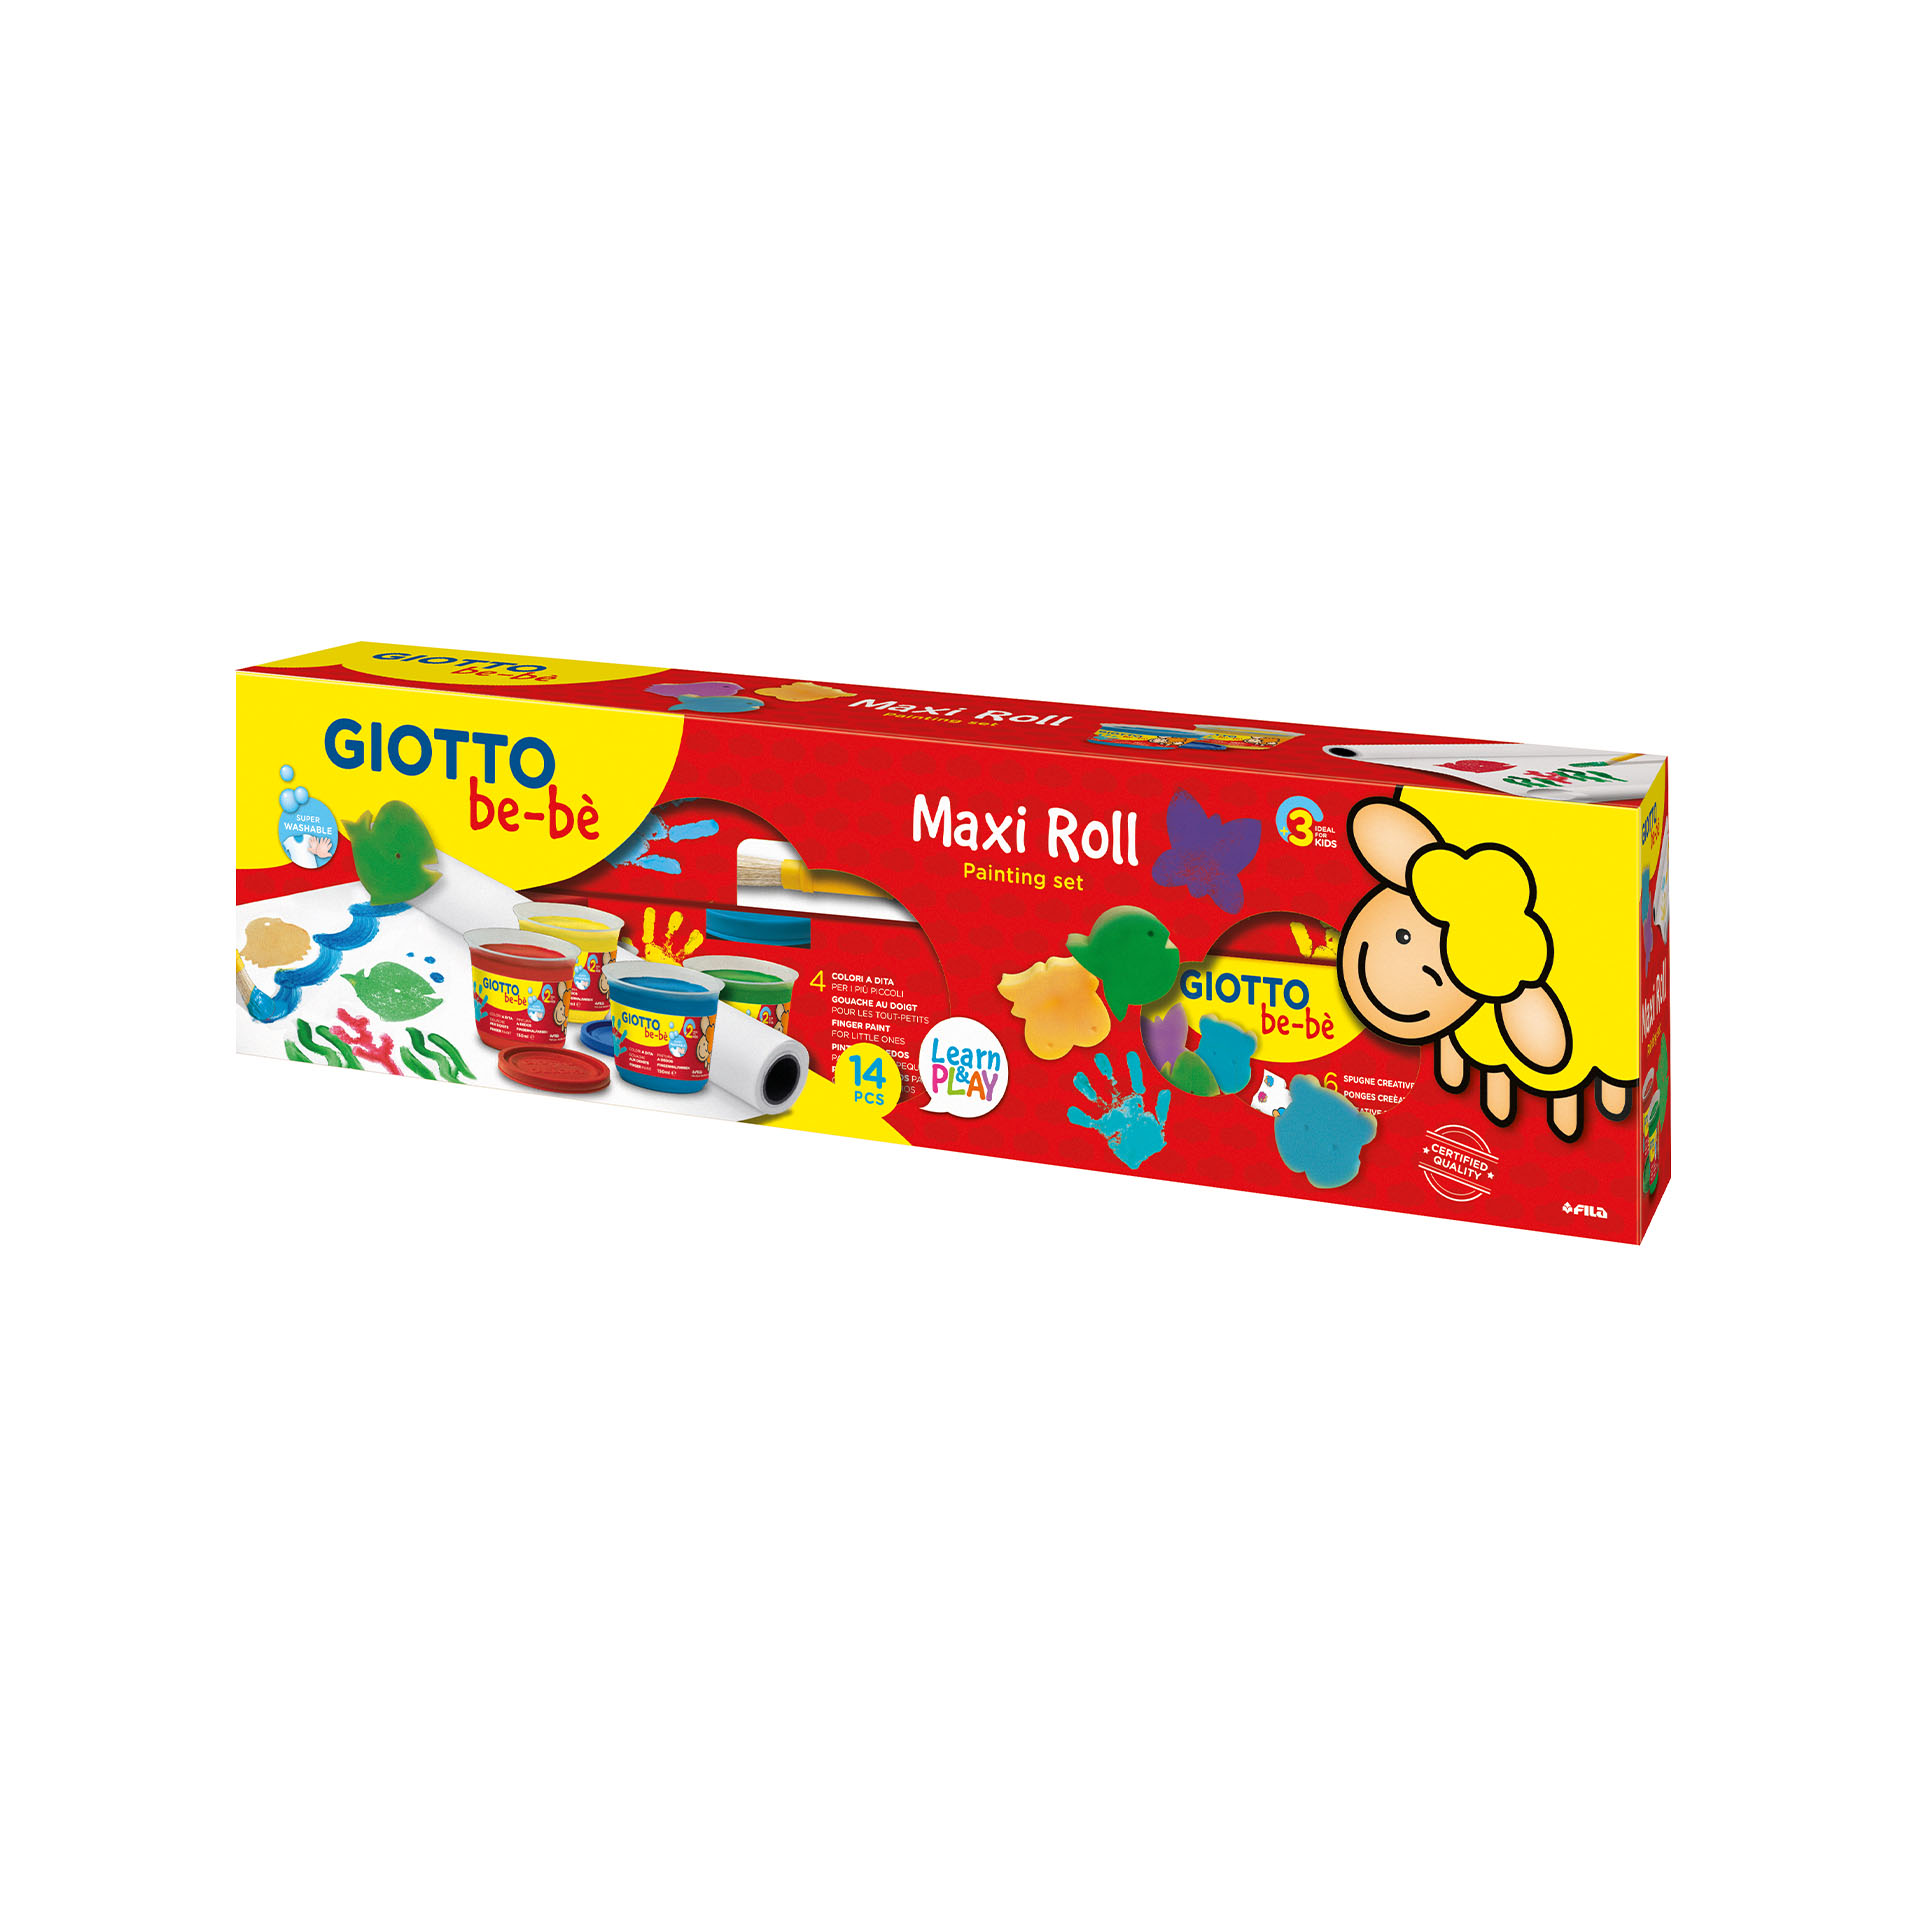 Giotto Be-bè Maxi Roll Painting Set, , large